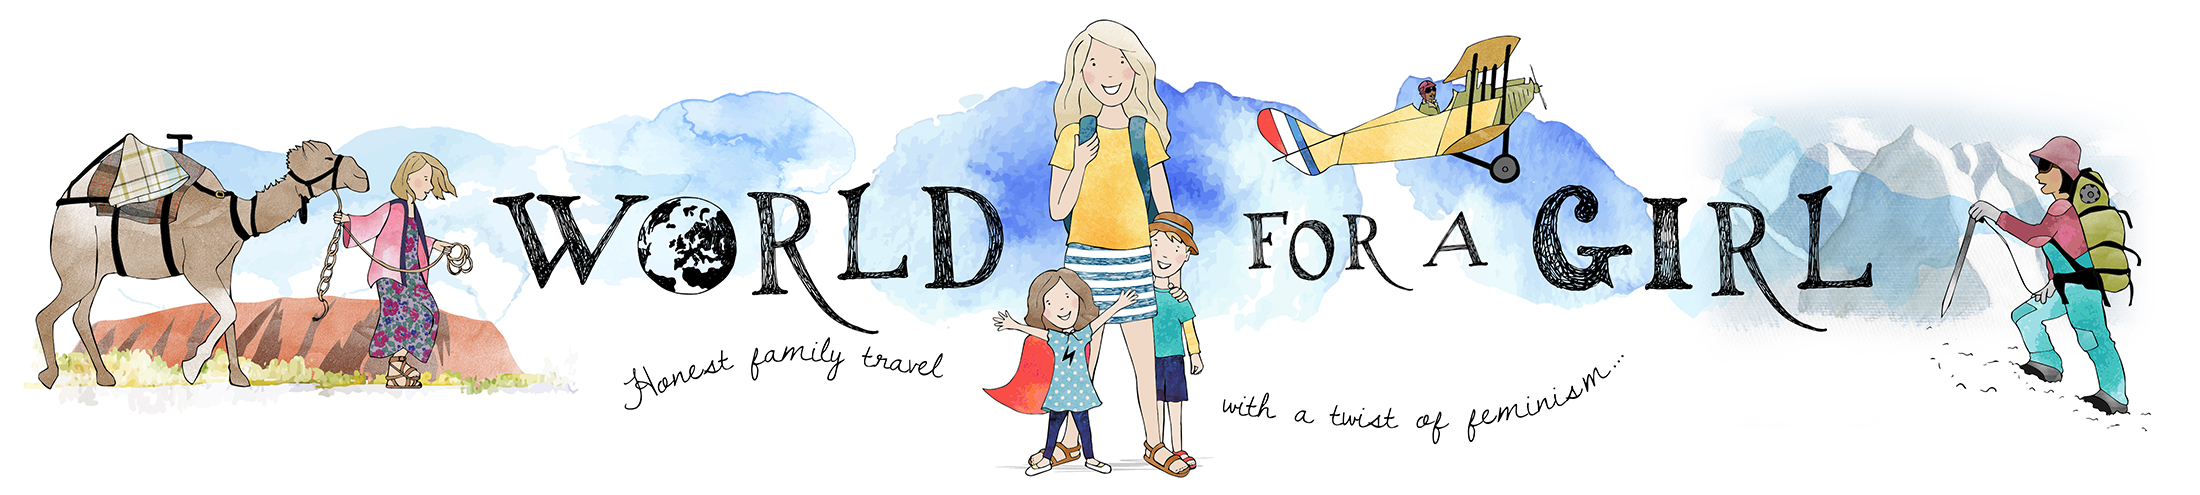 Family travel, with a twist of feminism